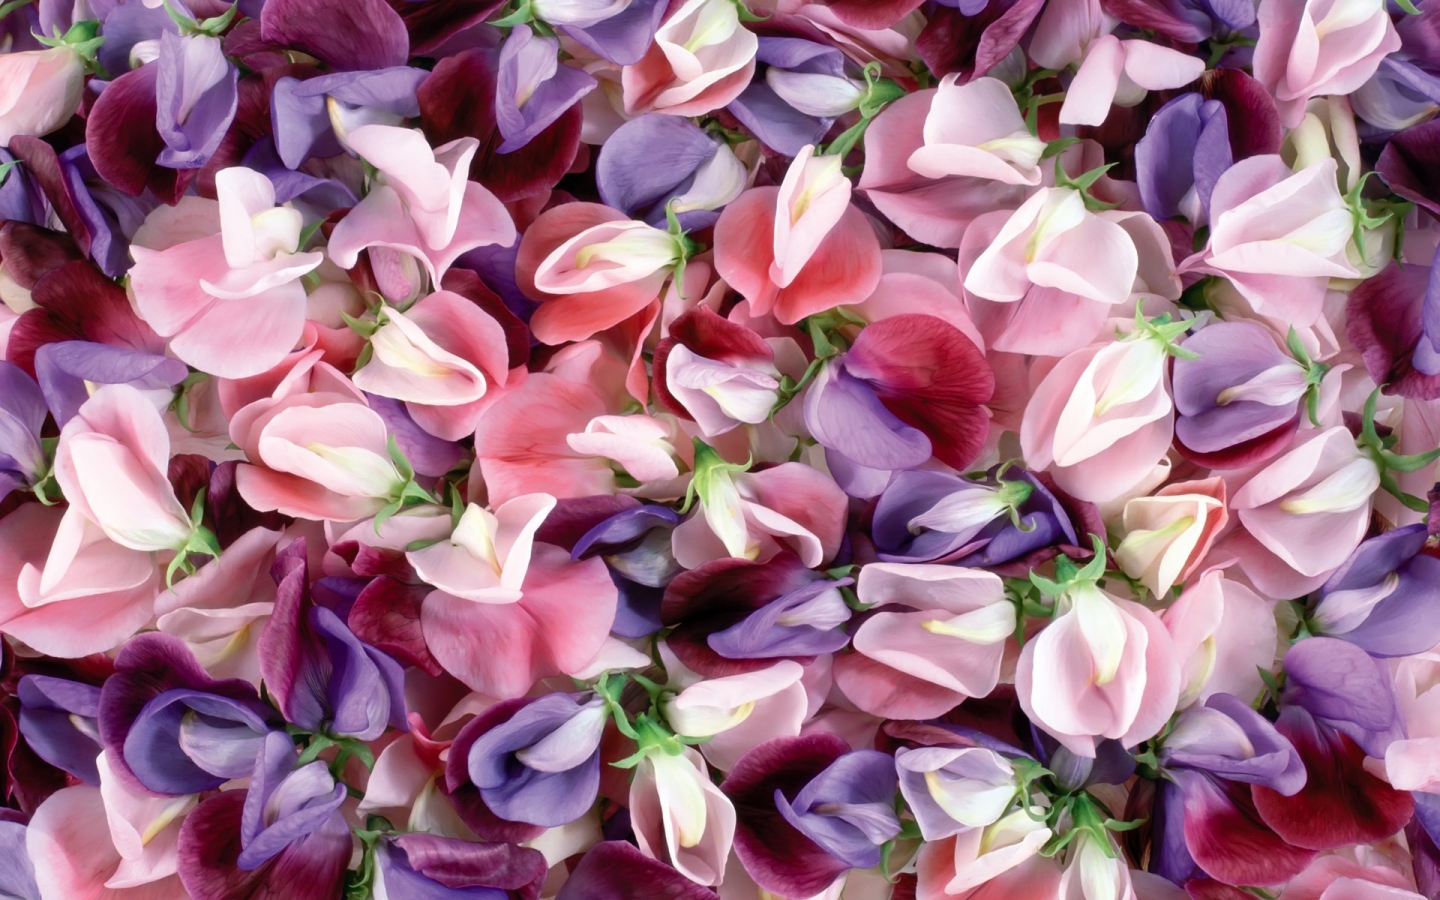 Purple and pink flowers for 1440 x 900 widescreen resolution